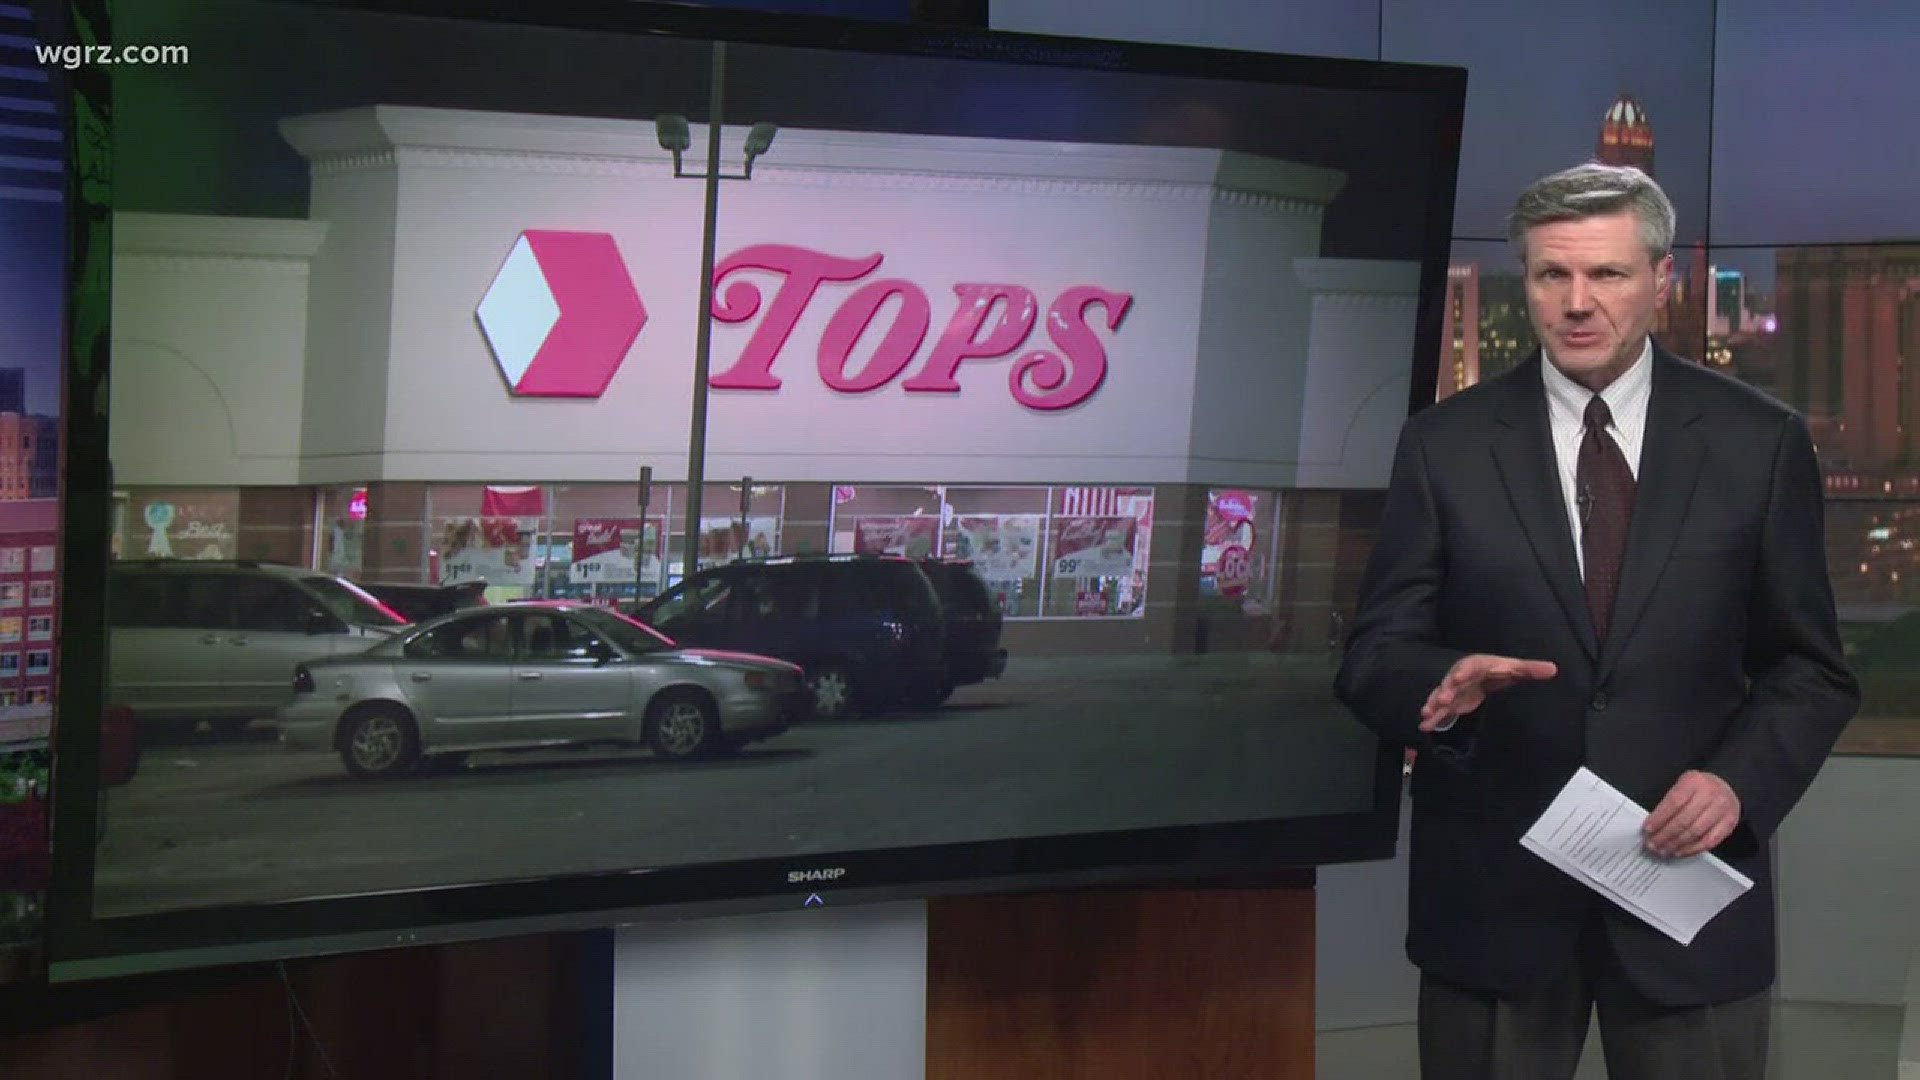 Following reports that Tops could file for bankruptcy, we're looking at how shoppers and employees could be impacted.